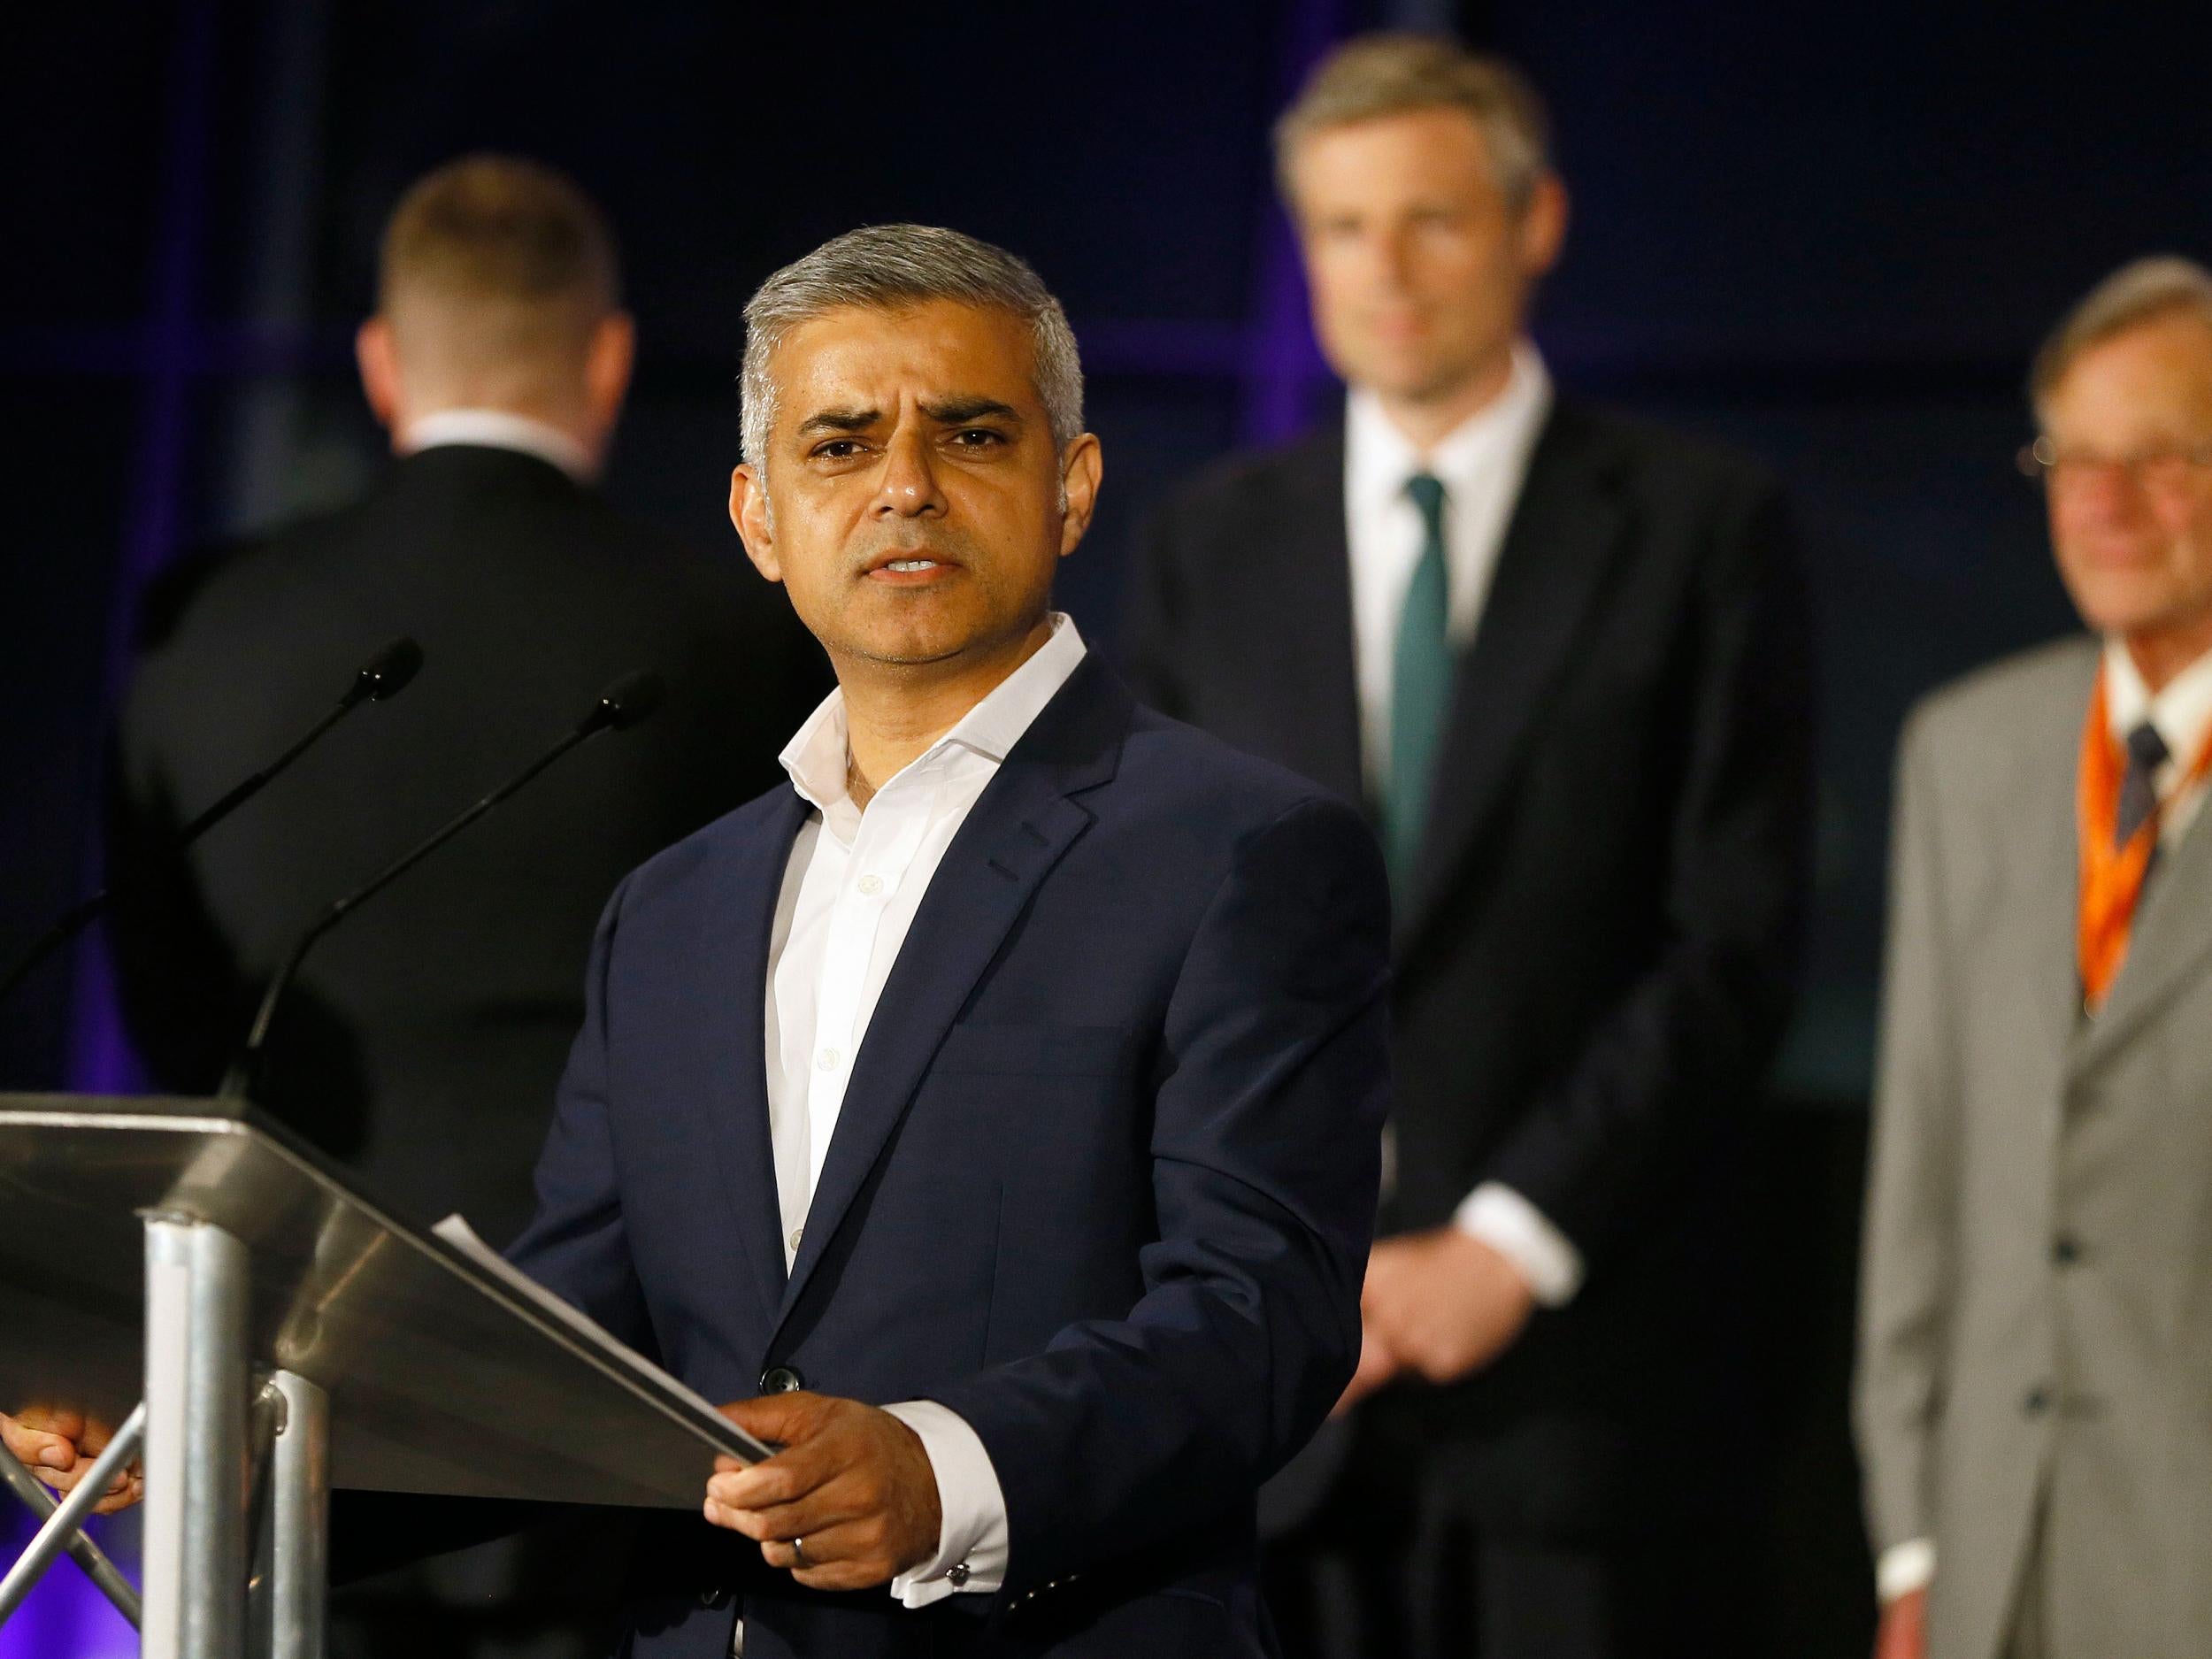 A tired Sadiq Khan speaks at City Hall after being confirmed as the new London Mayor - with Paul Golding, to his left, turning his back